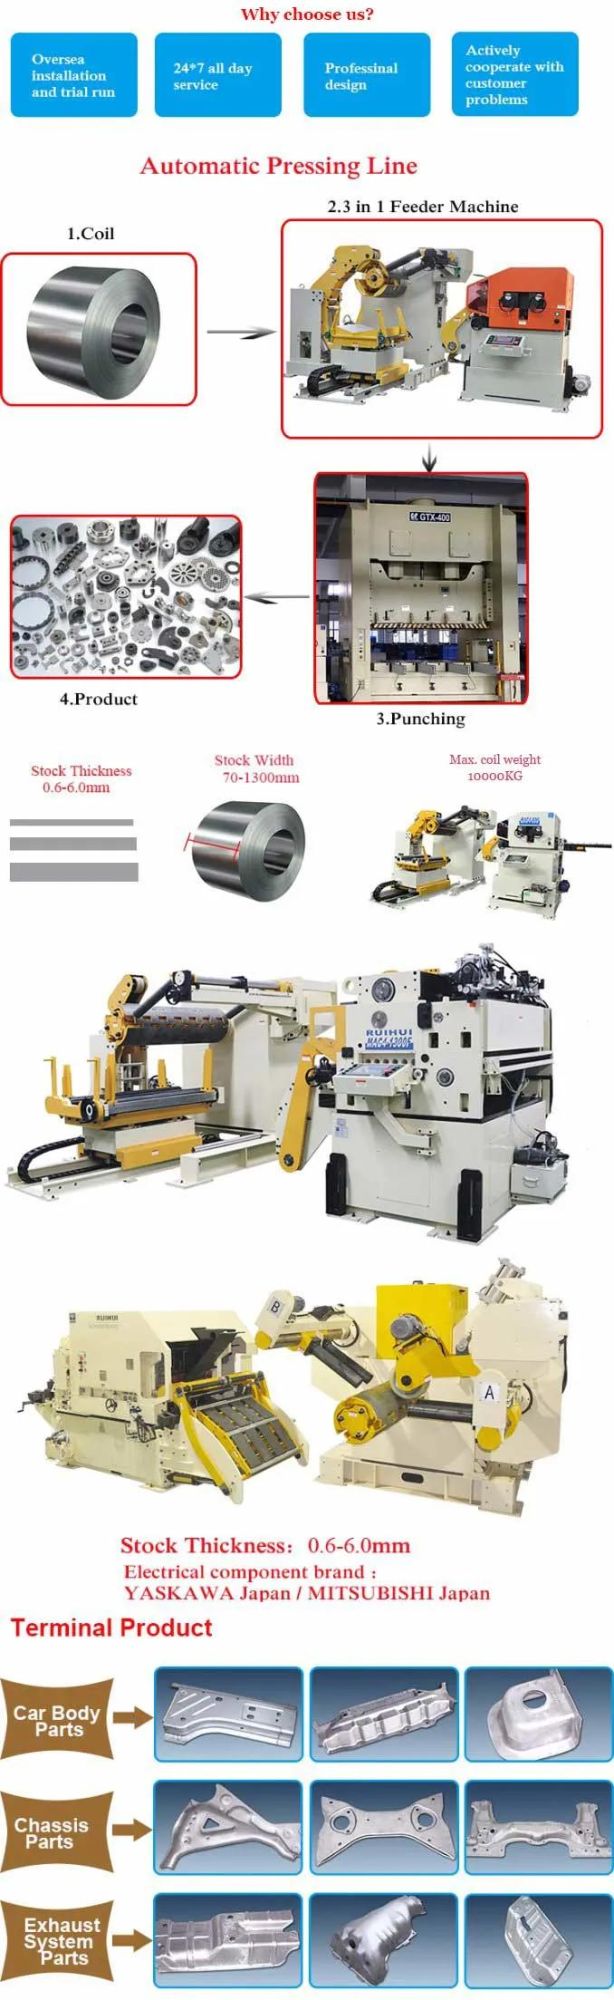 Nc Straightener Feeder Is Another Machine Call 3 in 1 (MAC4-1600F)